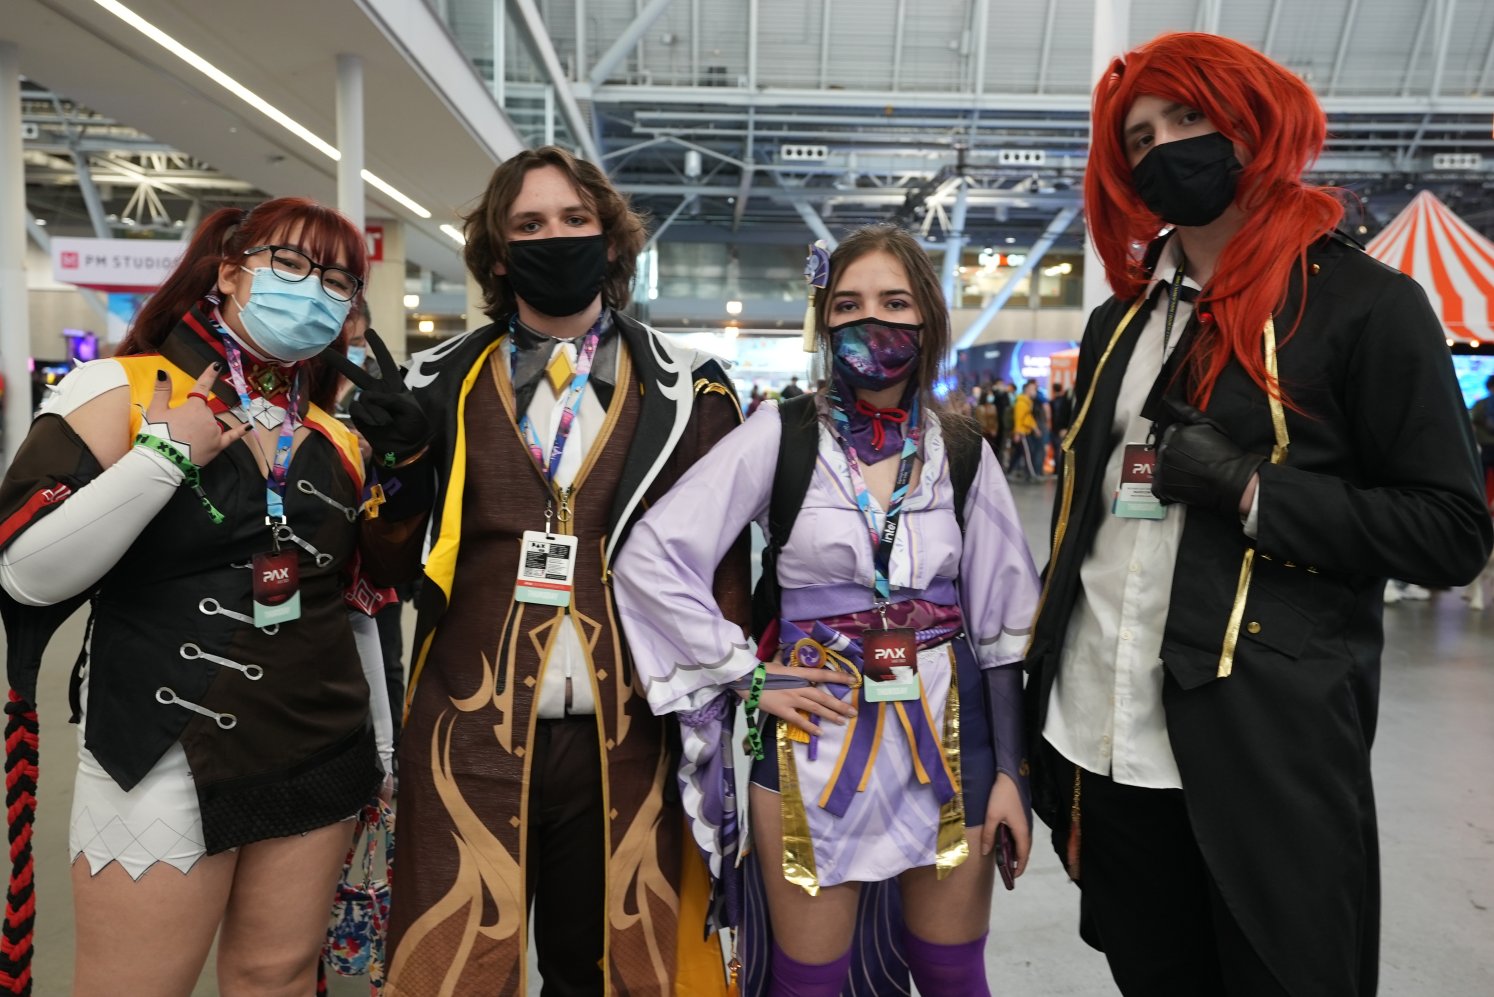 PAX East 2022 Check Out the Costumes NBC Boston